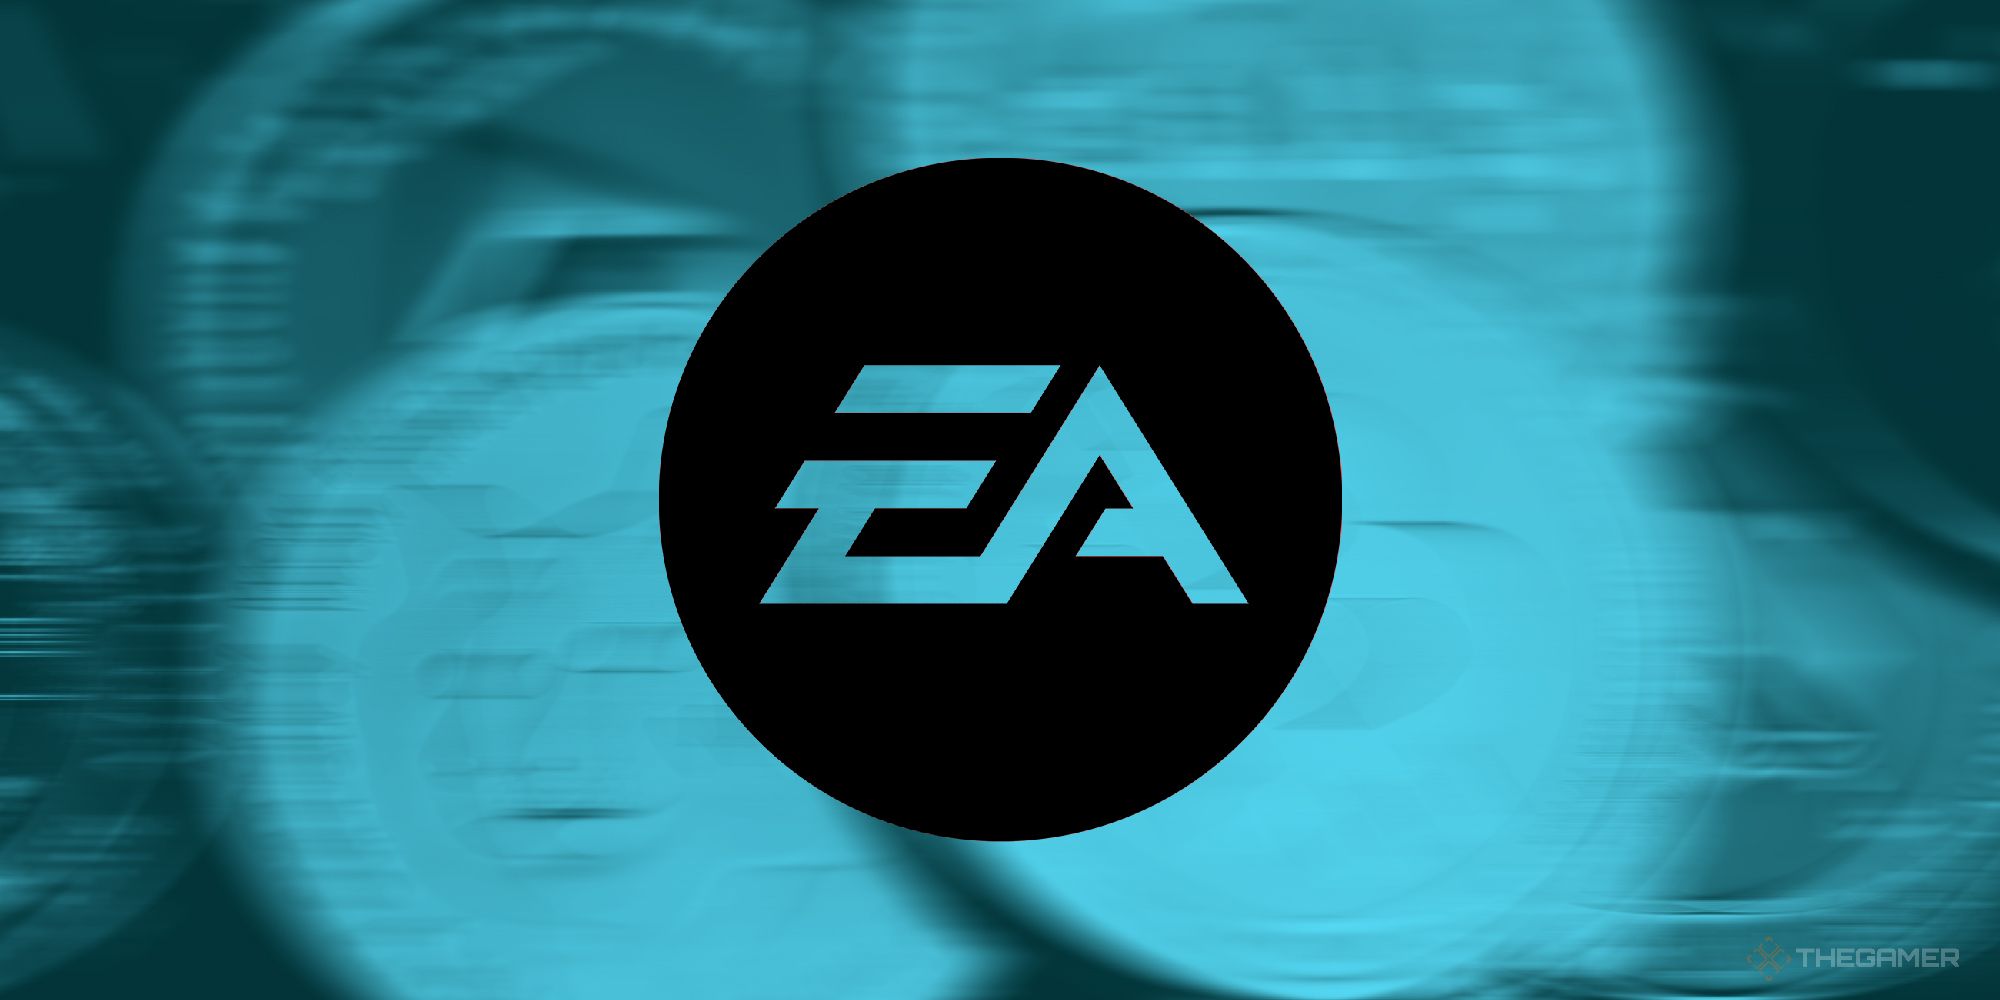 the EA logo with some bitcoin blurred and greyed out in the background